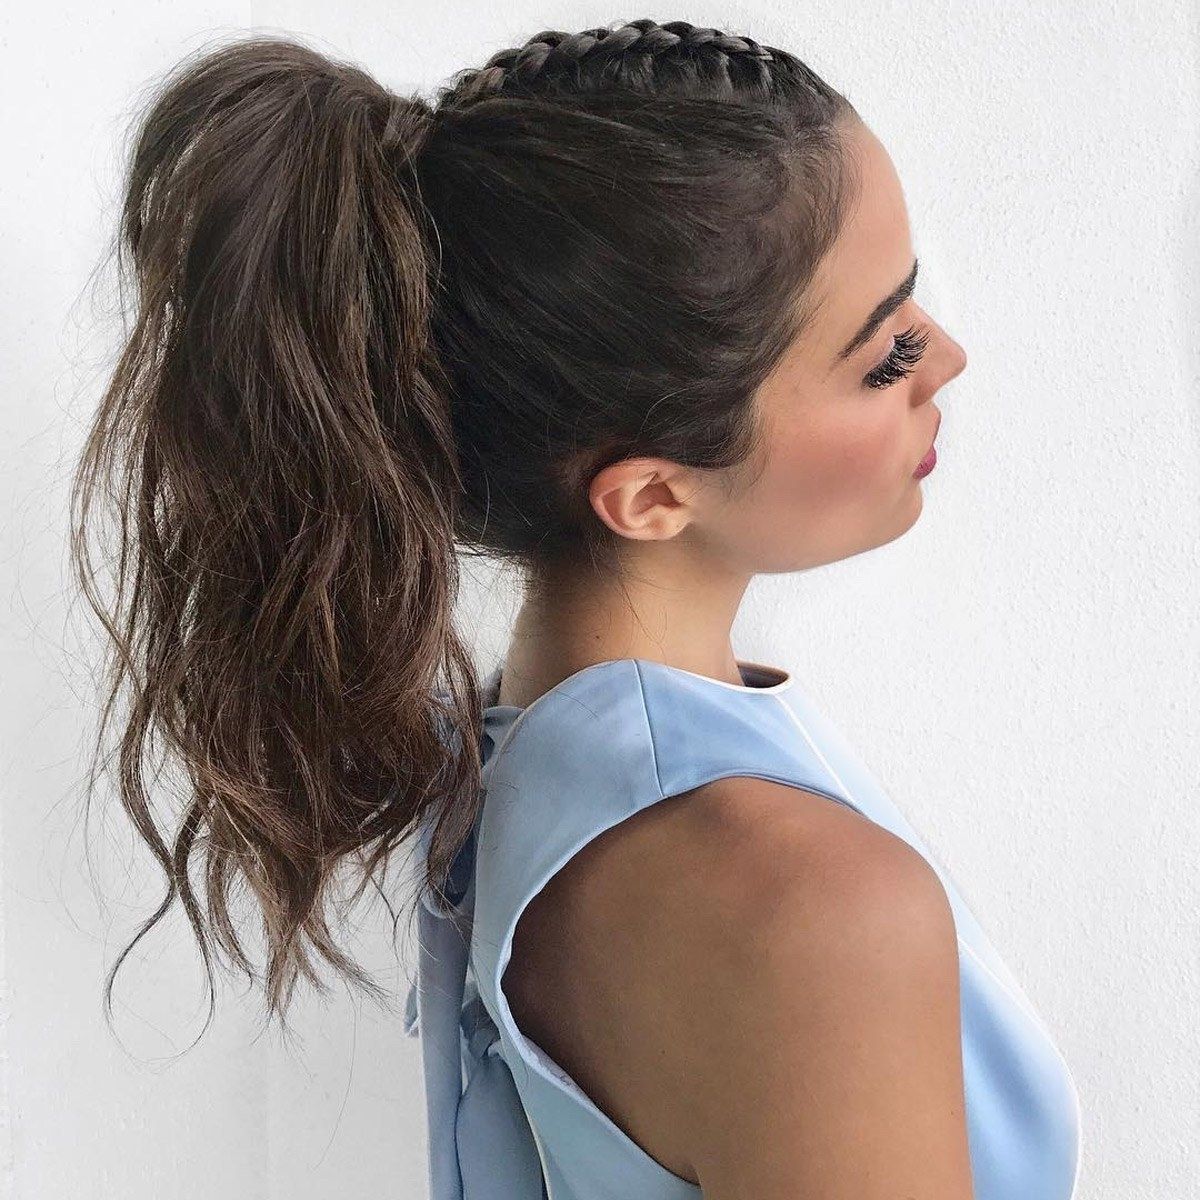 Fashionable Mohawk Braid And Ponytail Hairstyles Regarding 27 Ponytail Hairstyles For 2018: Best Ponytail Styles (View 8 of 20)